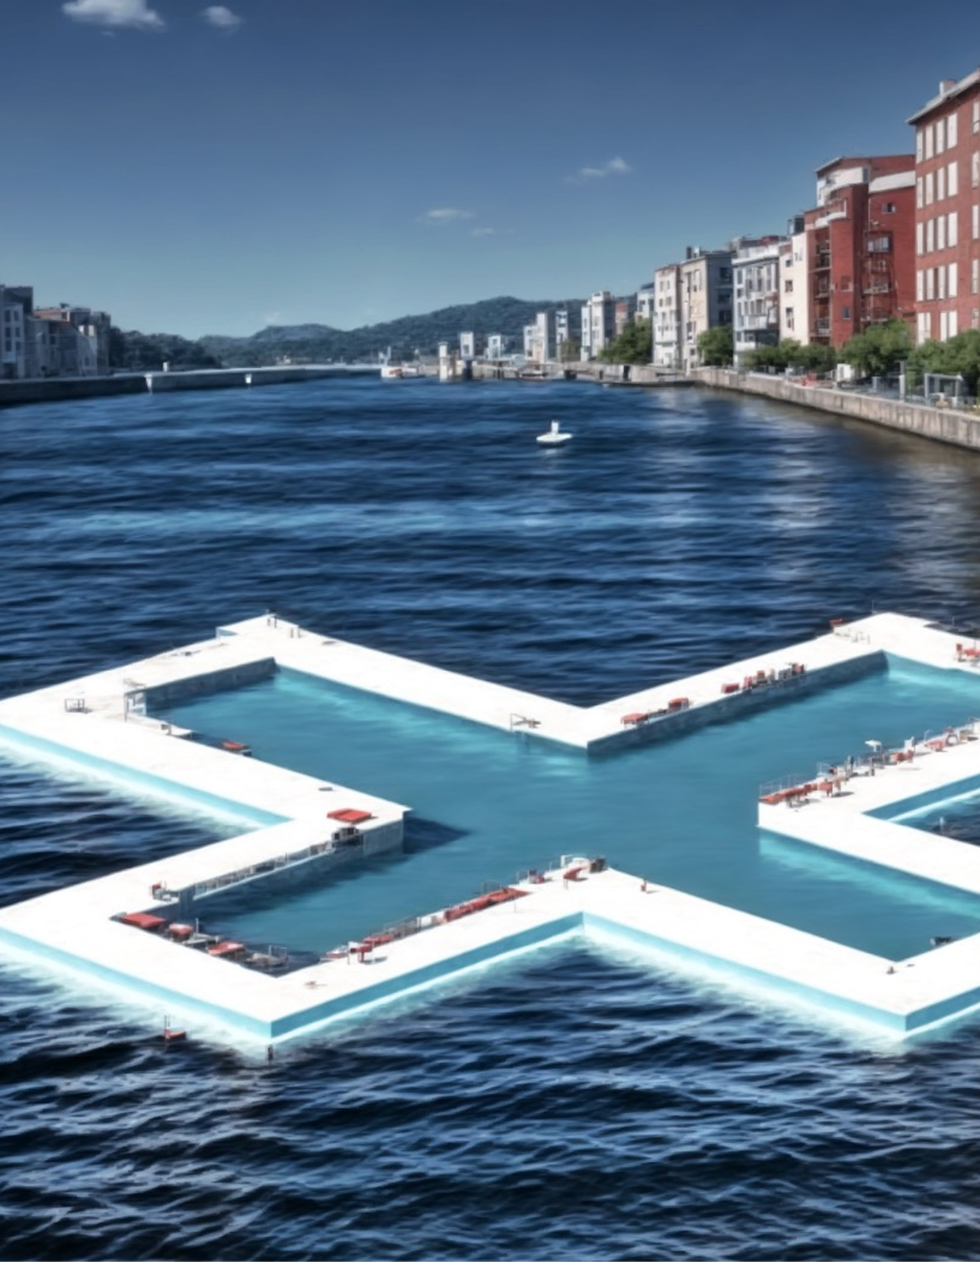 The City of Yonkers is considering installing a floating pool on the Hudson River designed by + POOL, a New York City nonprofit.